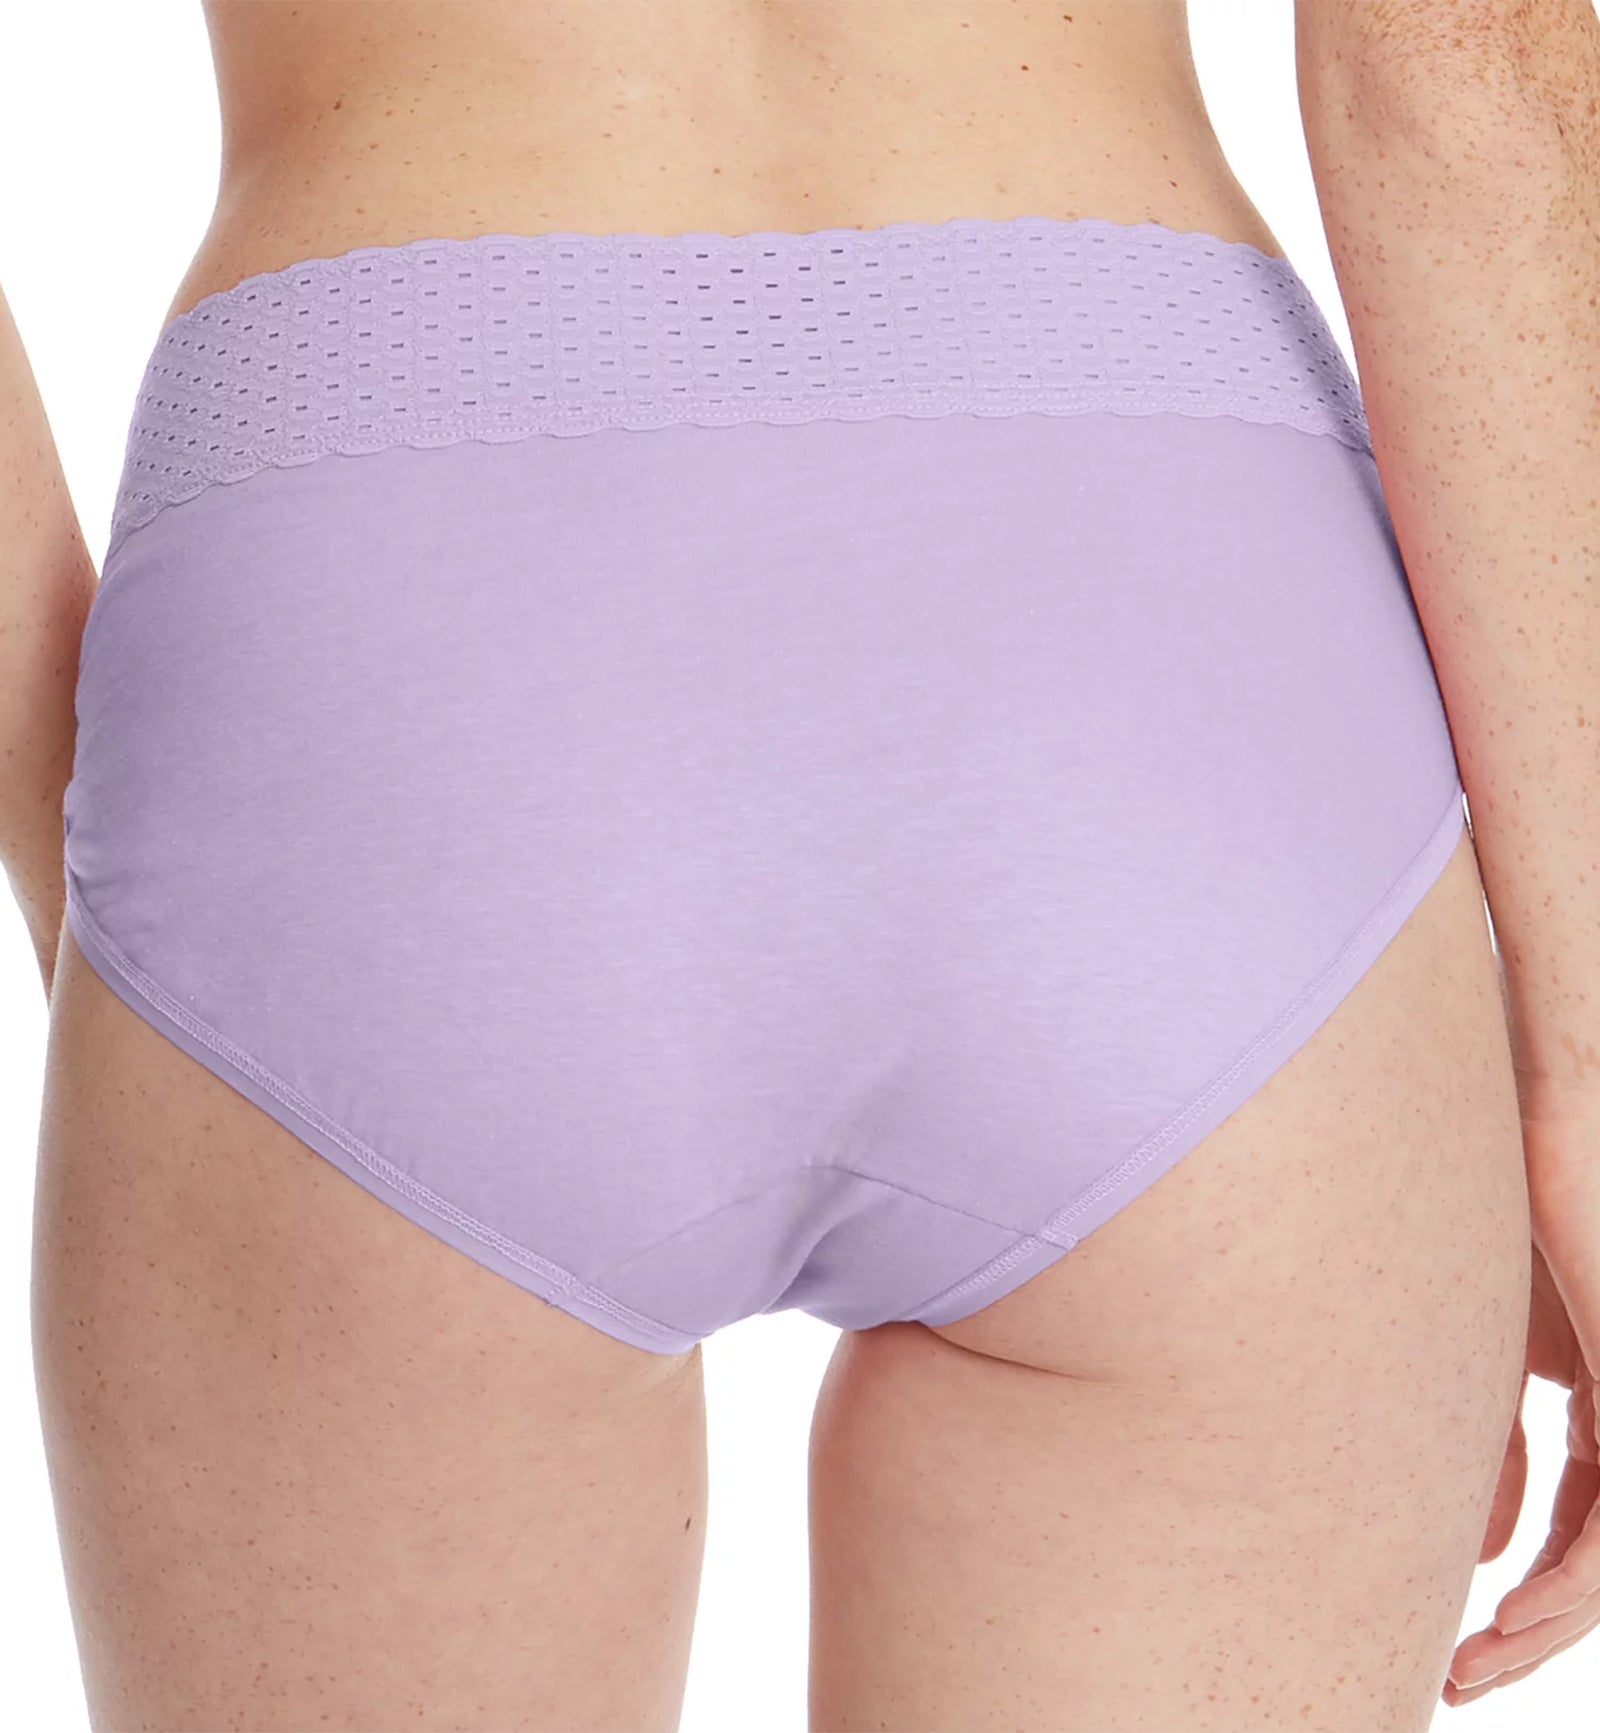 Hanky Panky Organic Cotton French Brief with Lace (792131),Small,Wisteria - Wisteria,Small